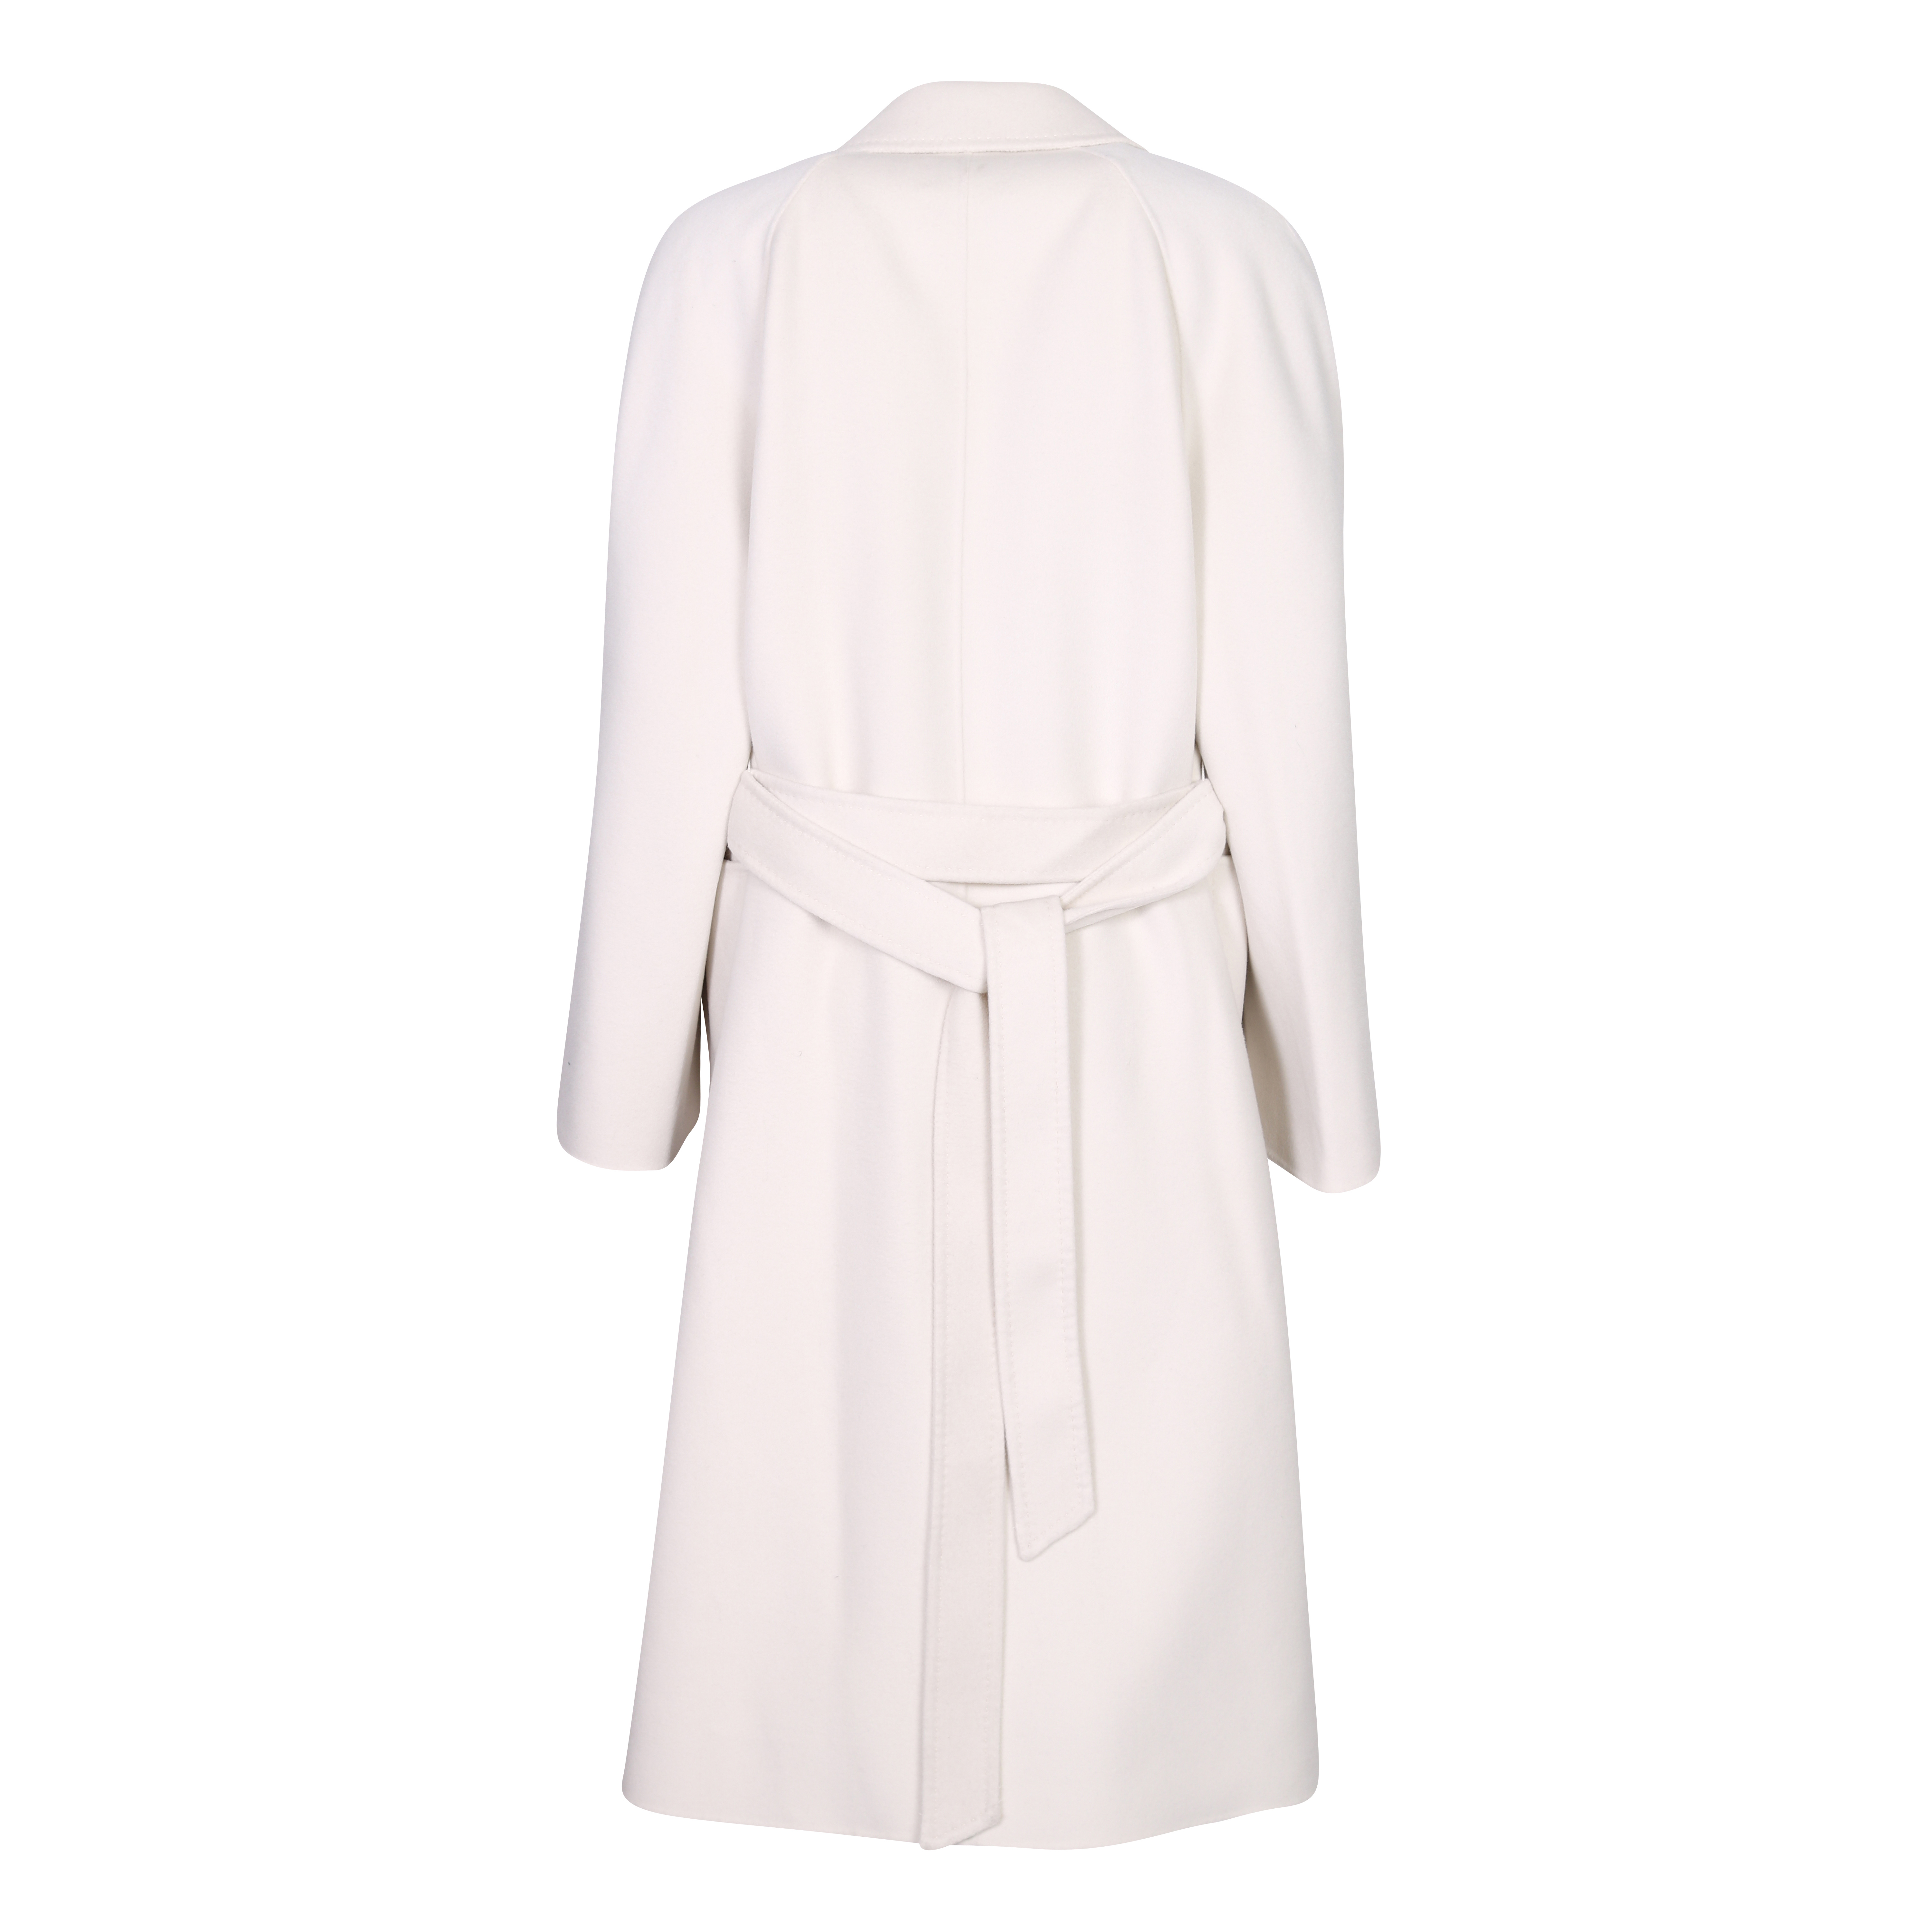 Flona Wool/Cashmere Coat in Offwhite M/L